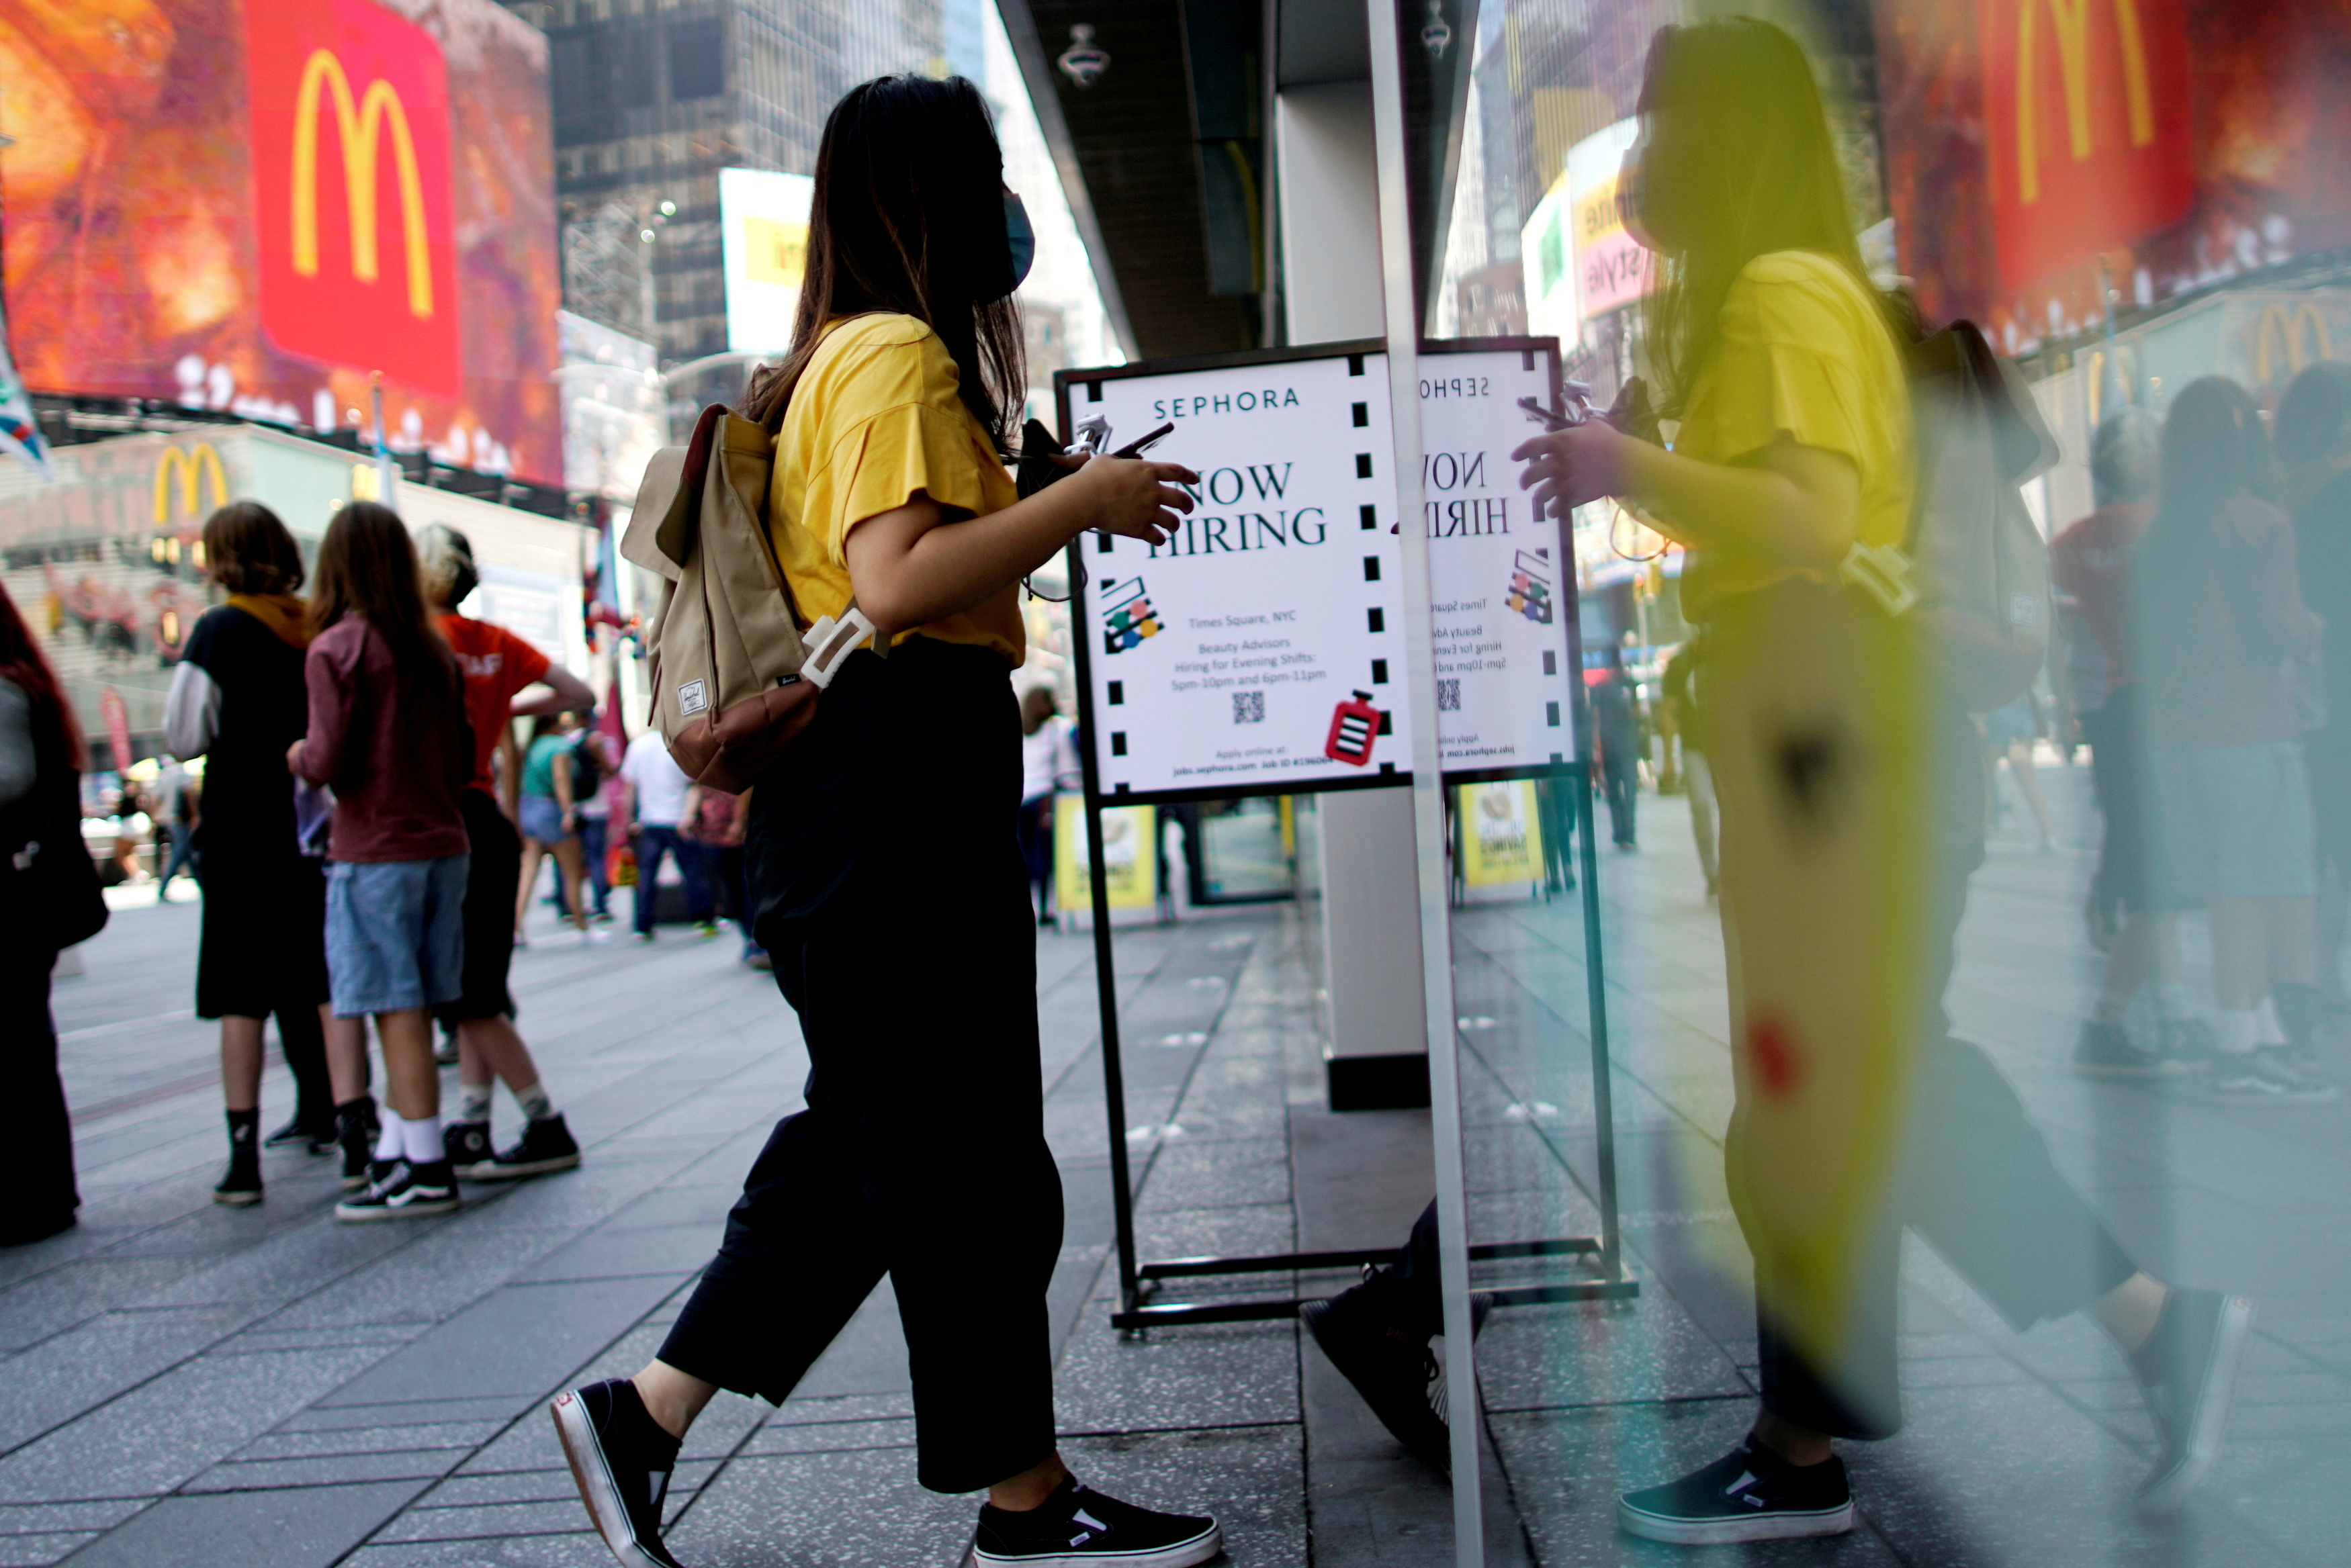 A sign advertising job openings is seen in New York